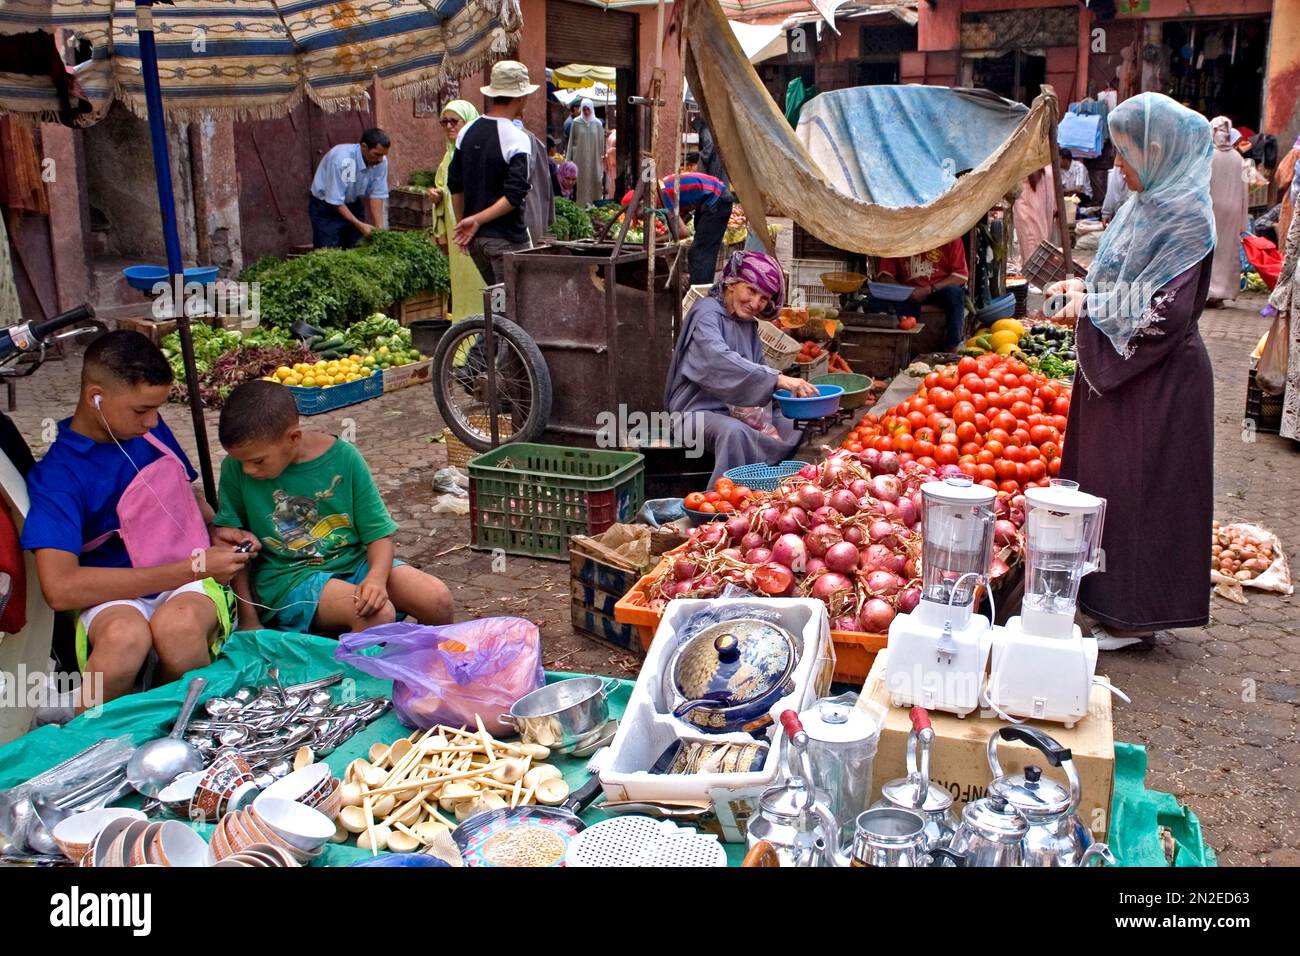 Children with mobile phones and vendors in the souk, Marrakech, Morocco, Africa Stock Photo